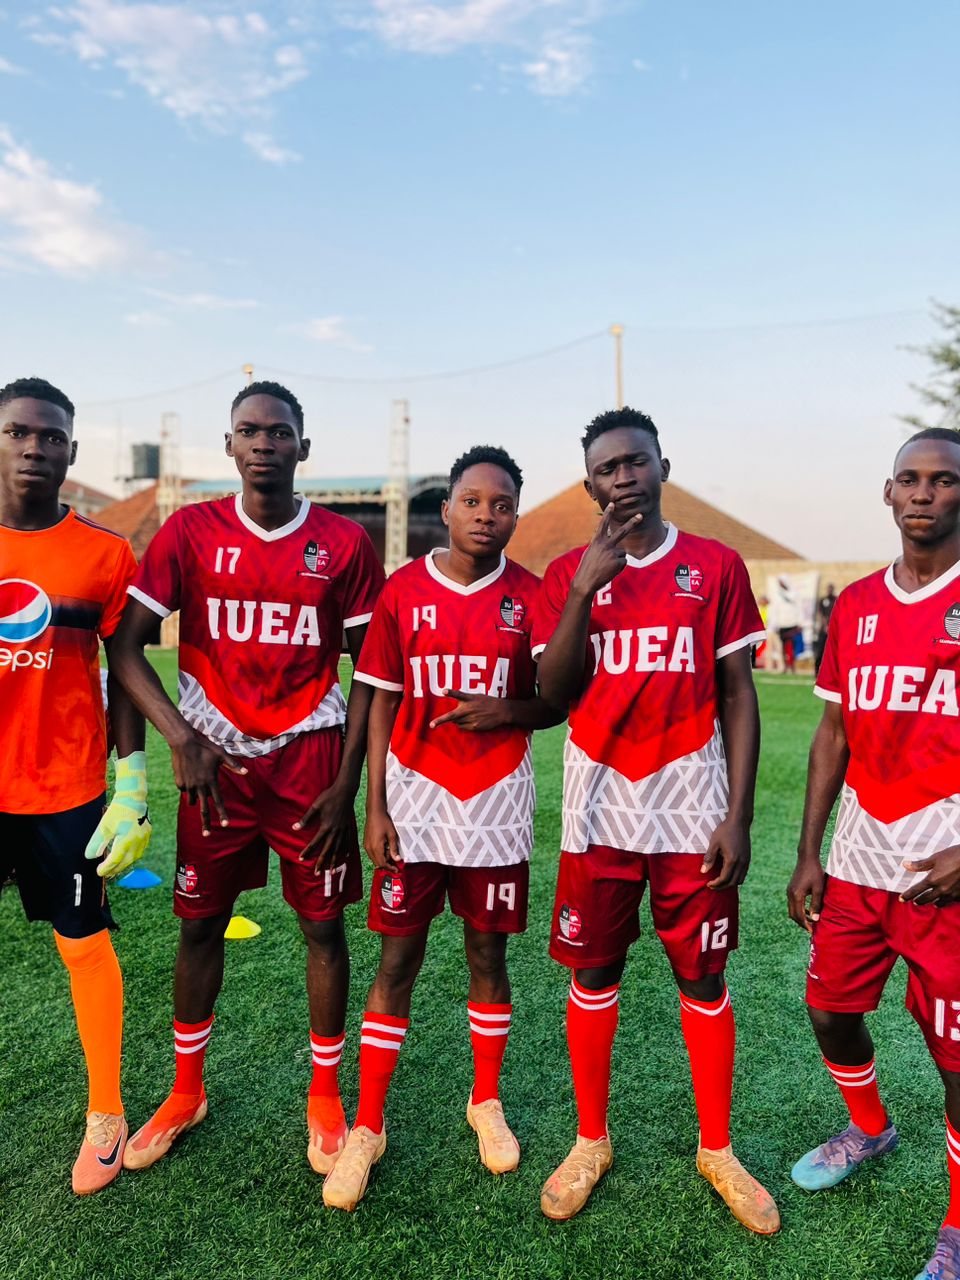 The International University of East Africa earned the prestigious privilege of having its team compete in the highly exclusive Yes Elite Pro Tournament, beginning their journey with an epic victory in their first match.